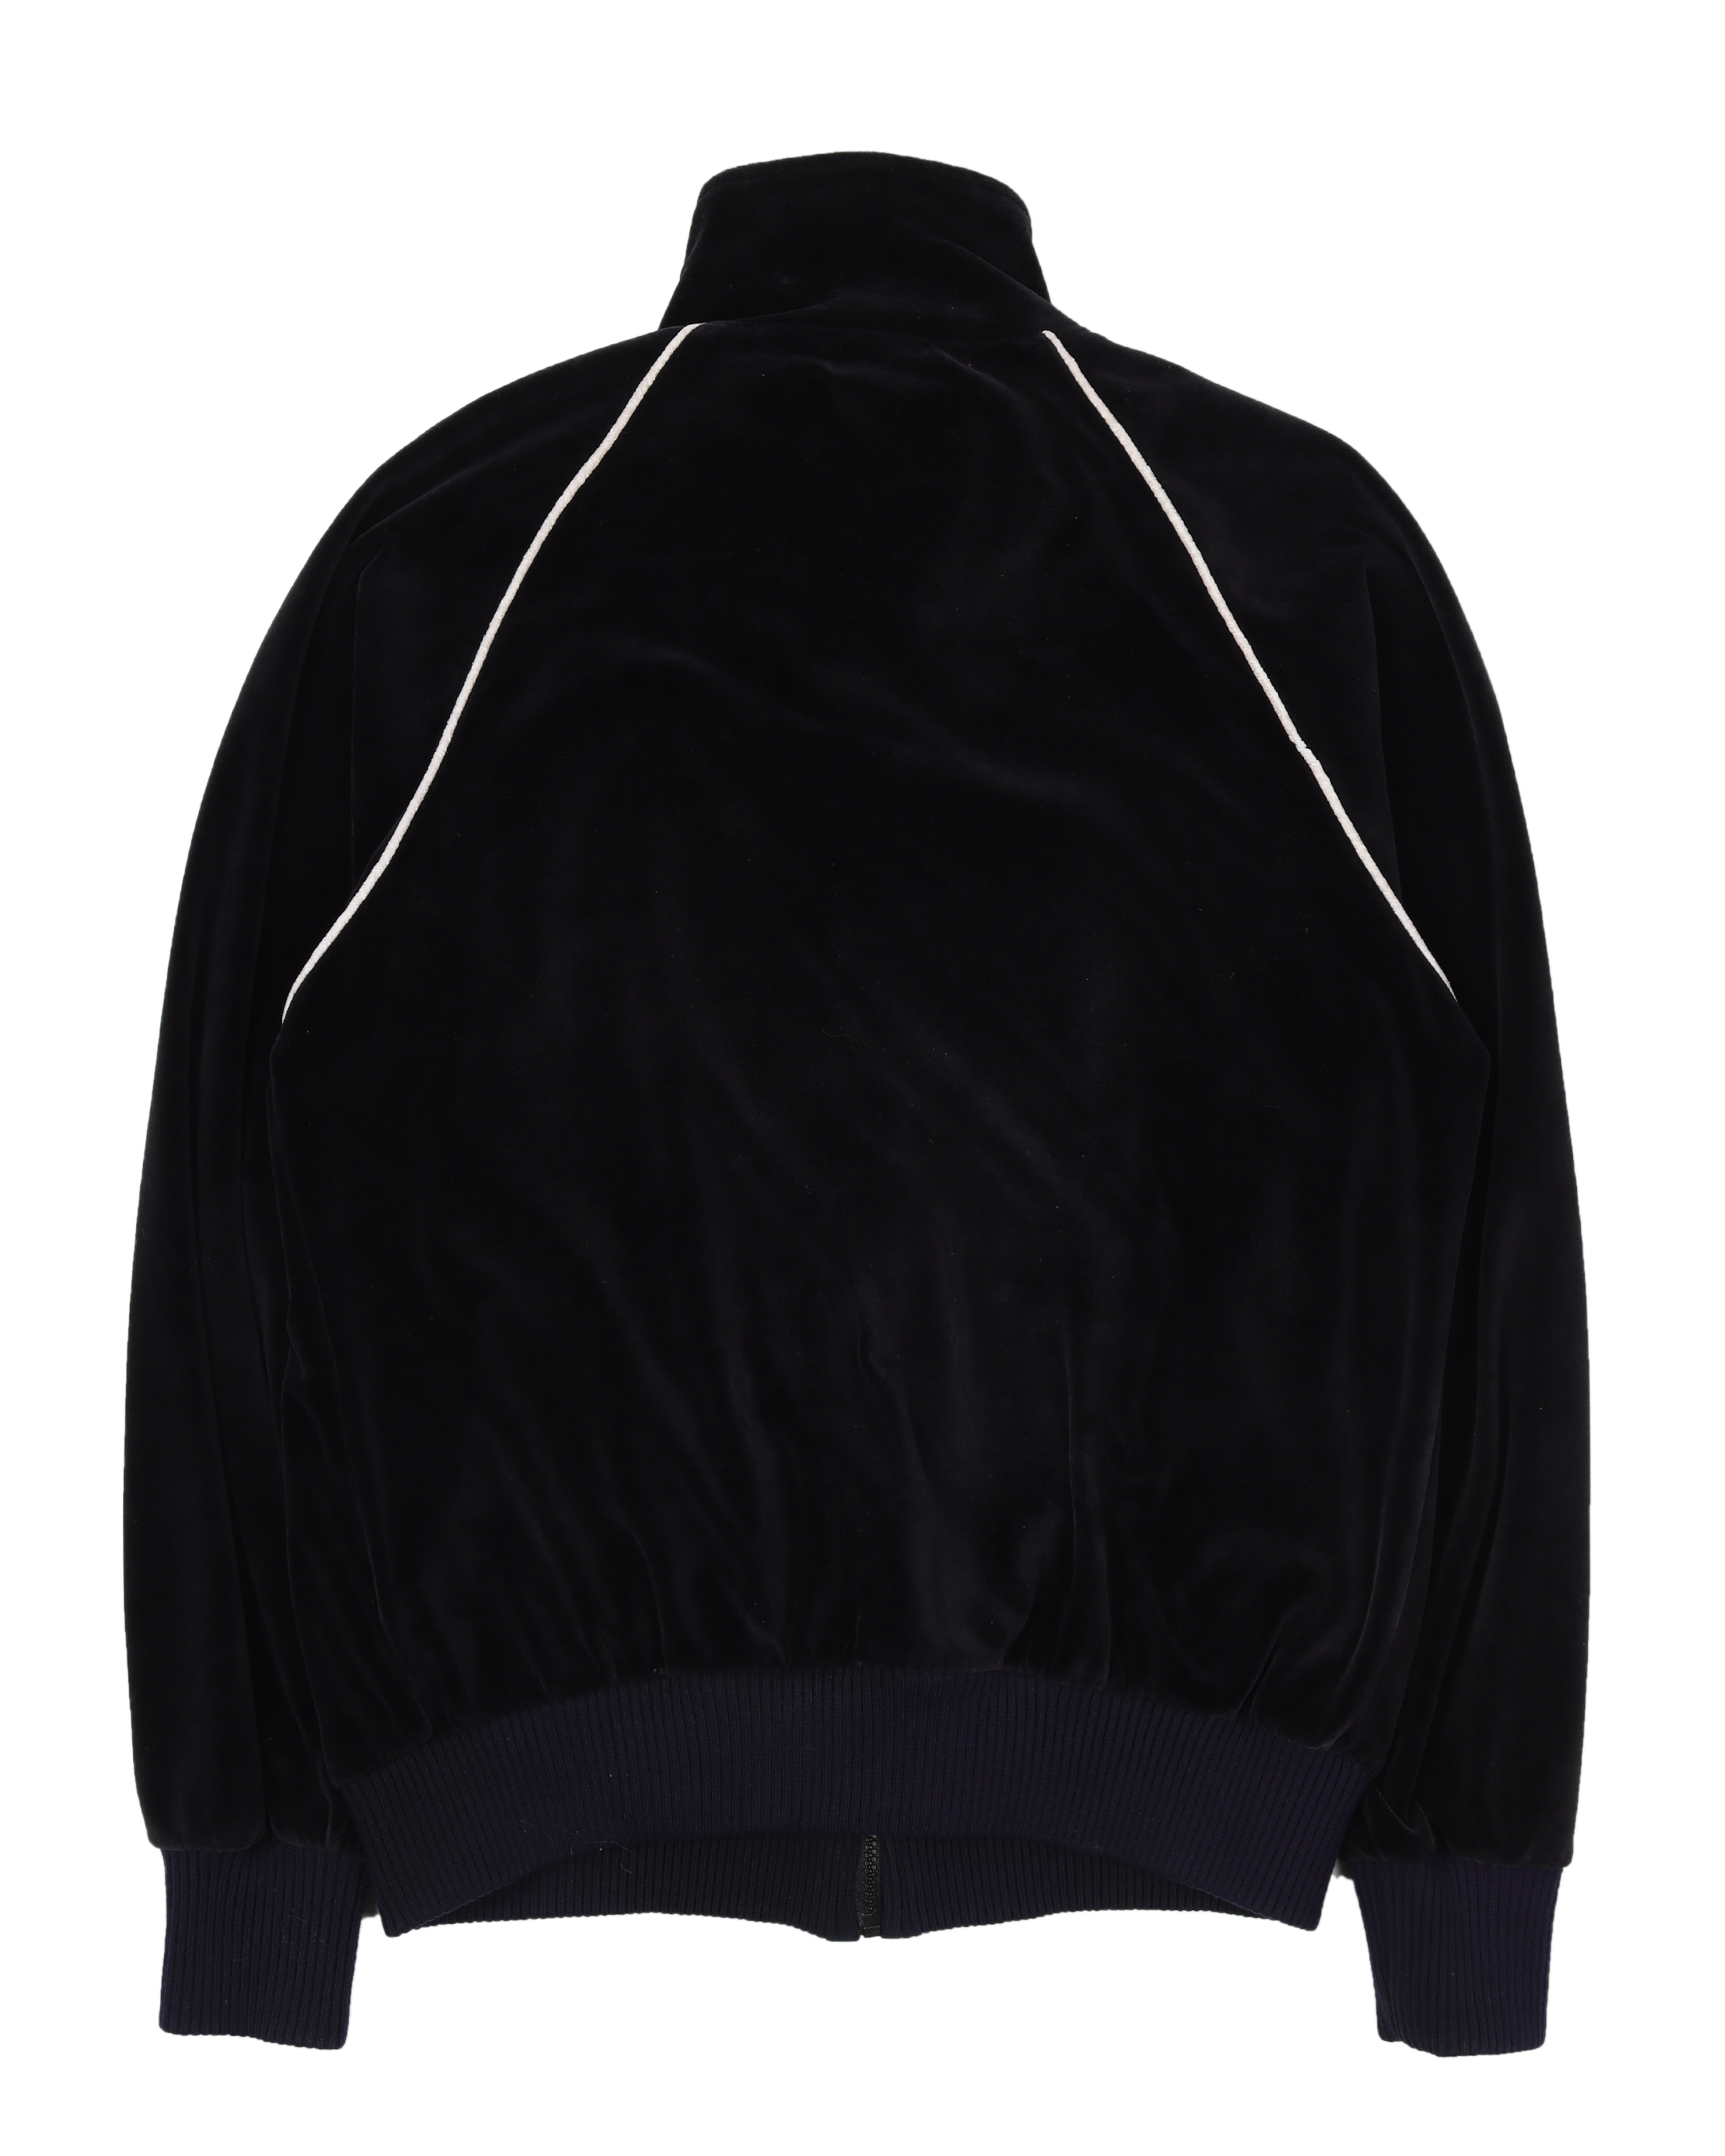 AW03 "Touch Me I'm Sick" Double Skull Velour Track Jacket